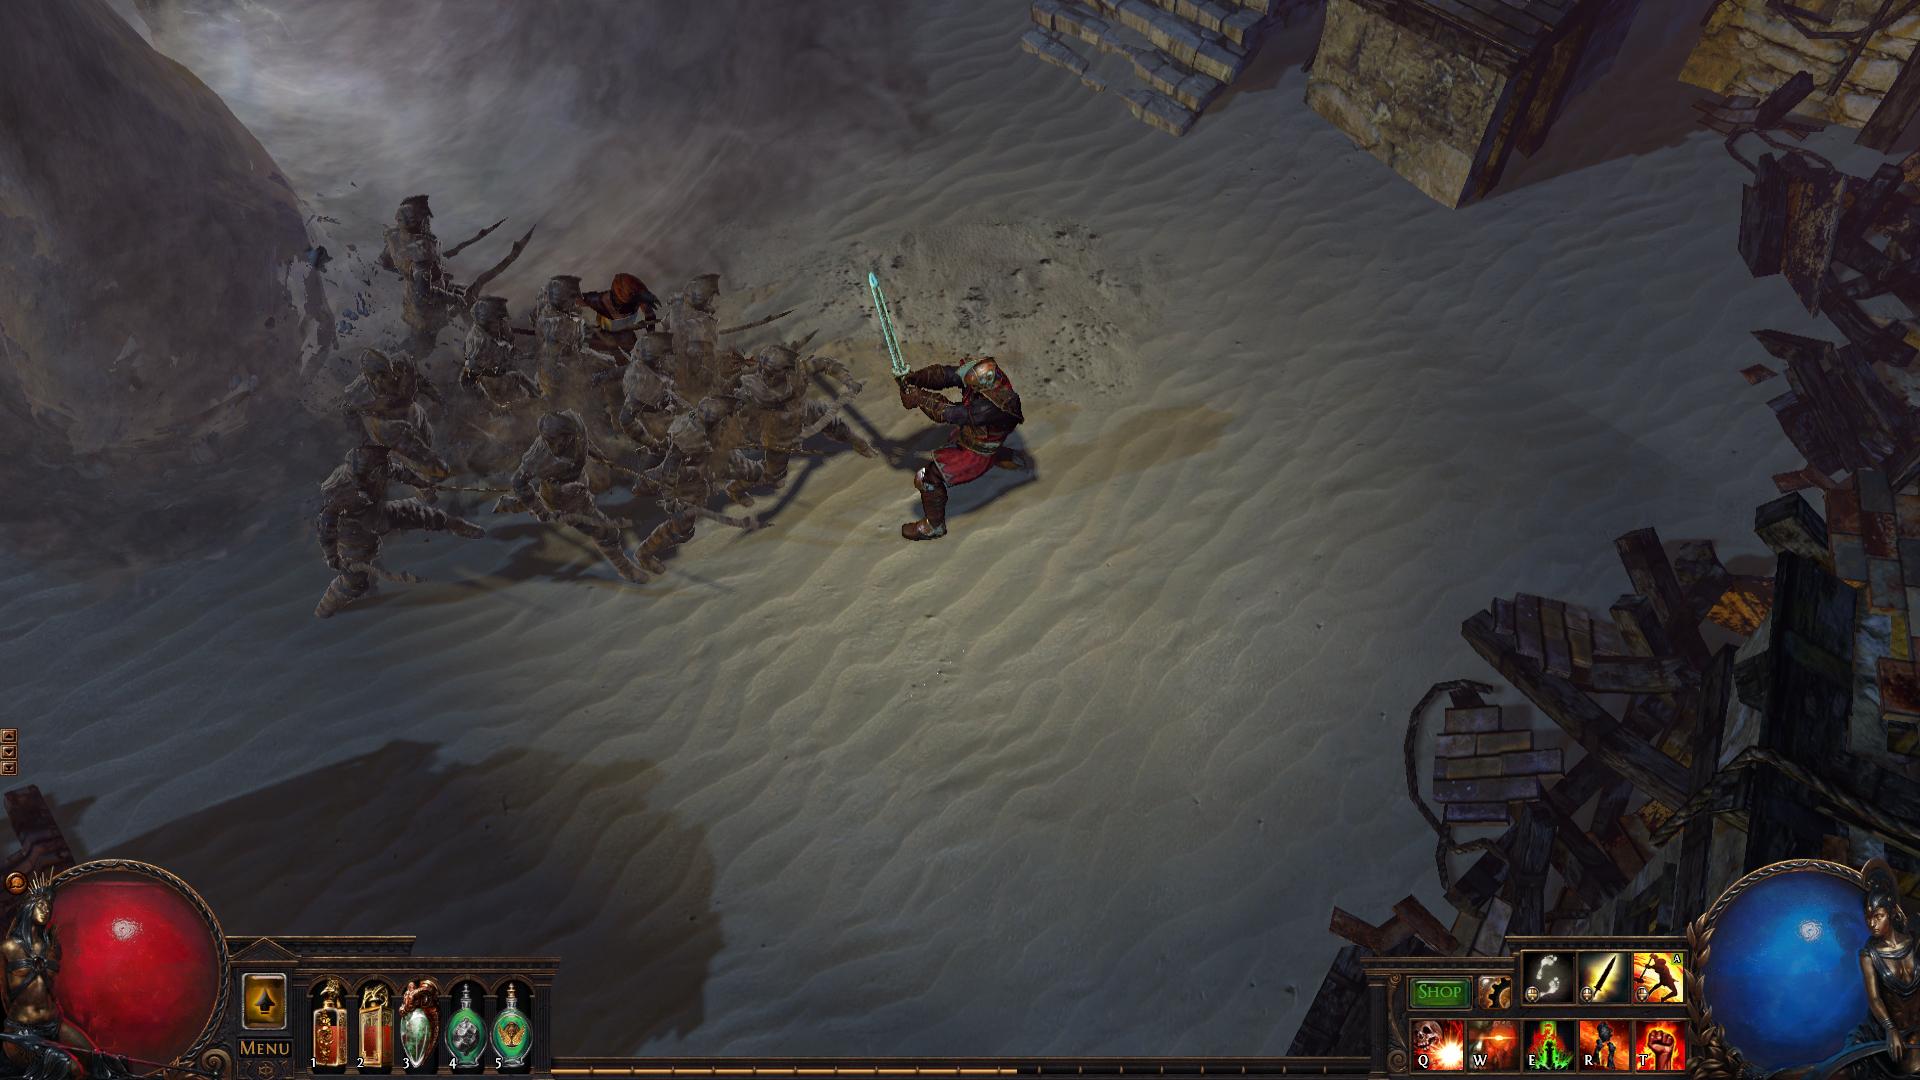 Screenshot №49 from game Path of Exile